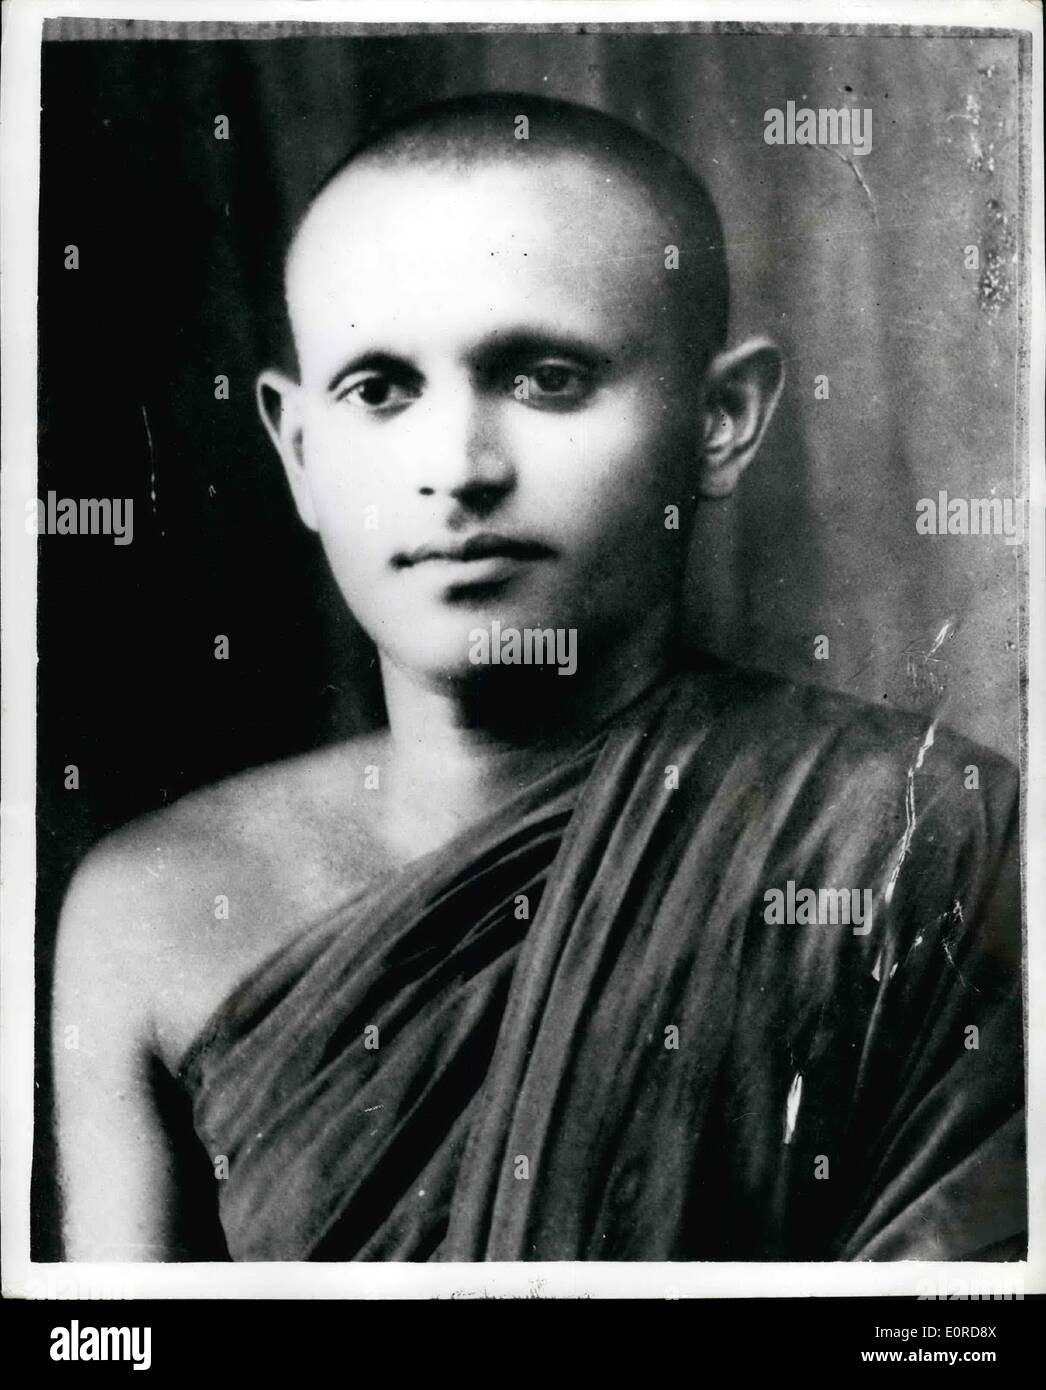 Feb. 02, 1959 - THE BUDDHIST MONK WHO ASSINATED THE CEYLONESE PRIME MINISTER PHOTO SHOWS:- The Buddhist monk who assinated Mr. BANDARANAIKS, the Ceylon Prime Minister, by firing six revolver shots at him. He gave his name as TALDUWE SOMARAMA, age 43. The Prime Minster's last statement to the nation, made just before be died, asked the people set to wreak vengeance on the assassin. Stock Photo